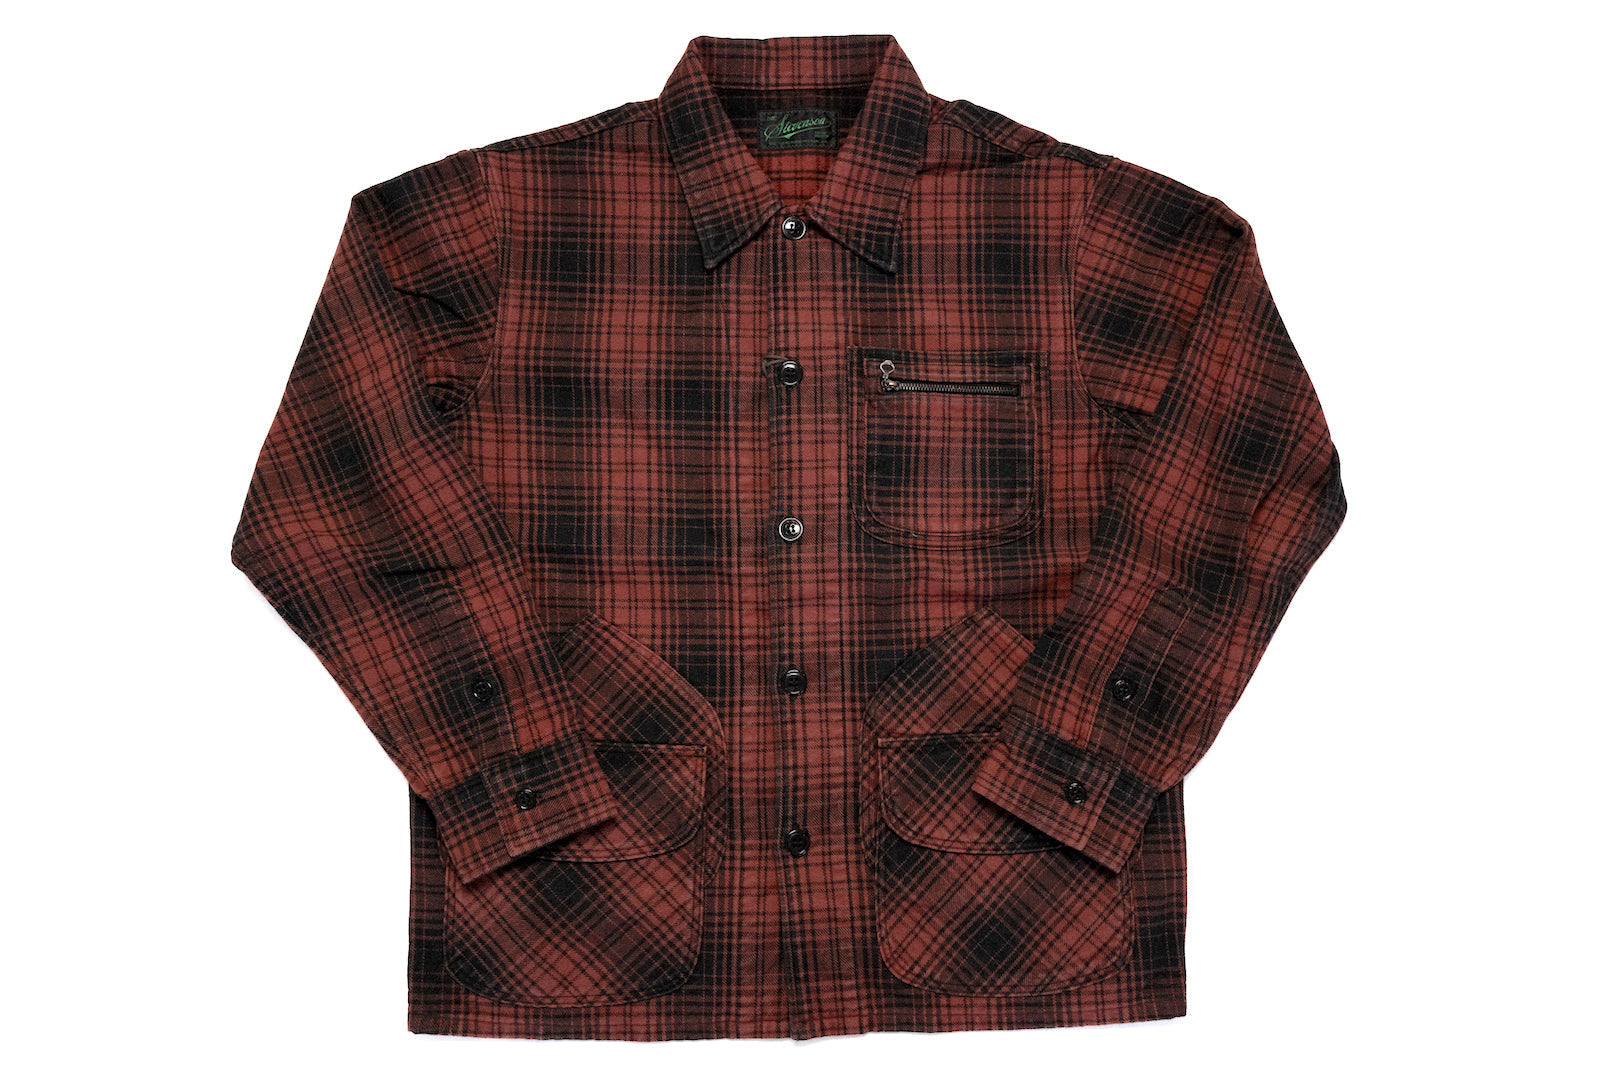 Stevenson Overall Co. "Duck Shooter" Flannel Hunting Jacket